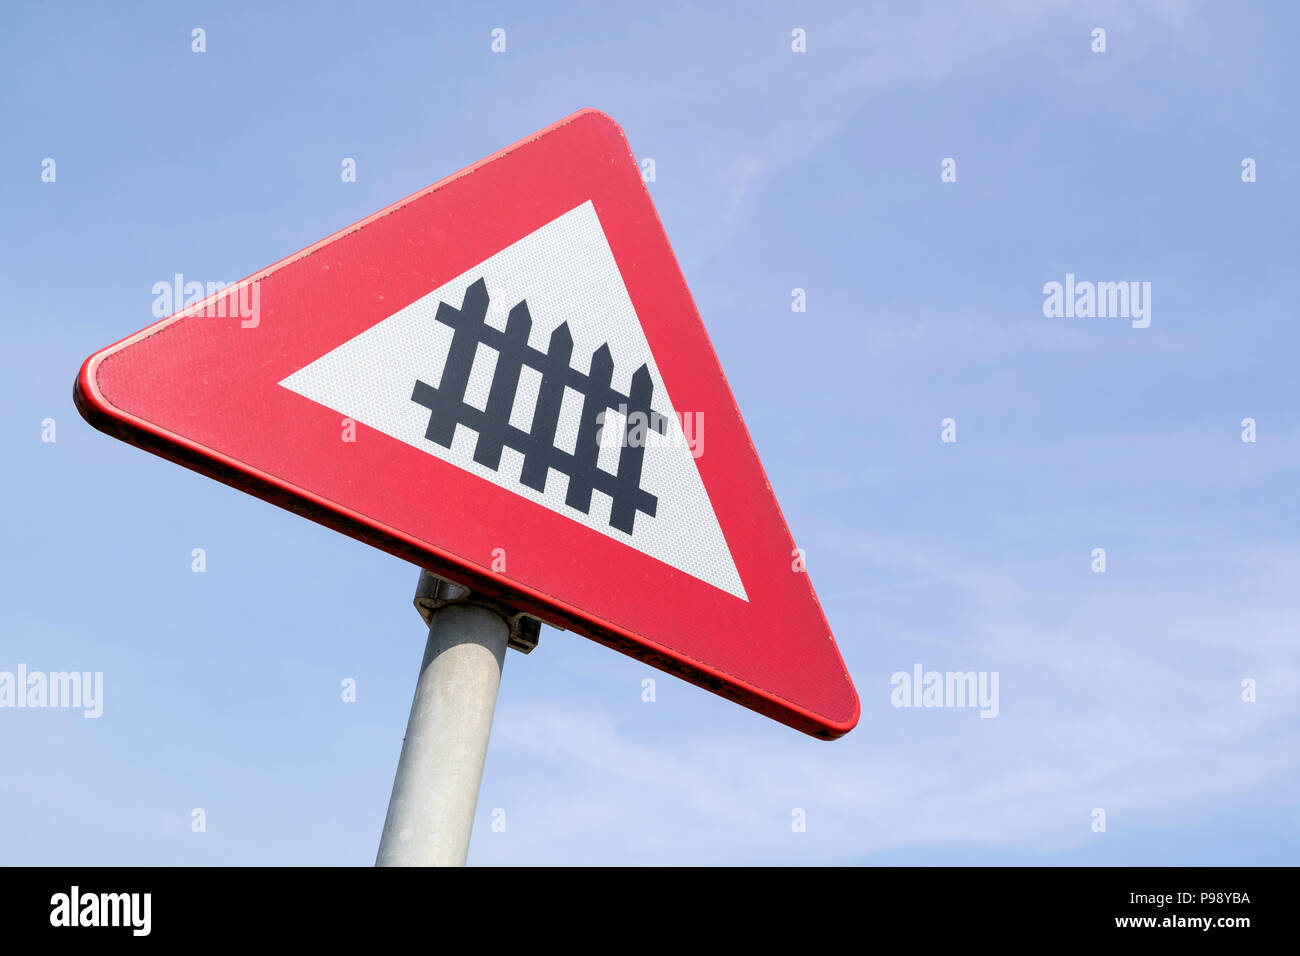 Guarded Railway Crossing Ahead High Resolution Stock Photography And Images Alamy